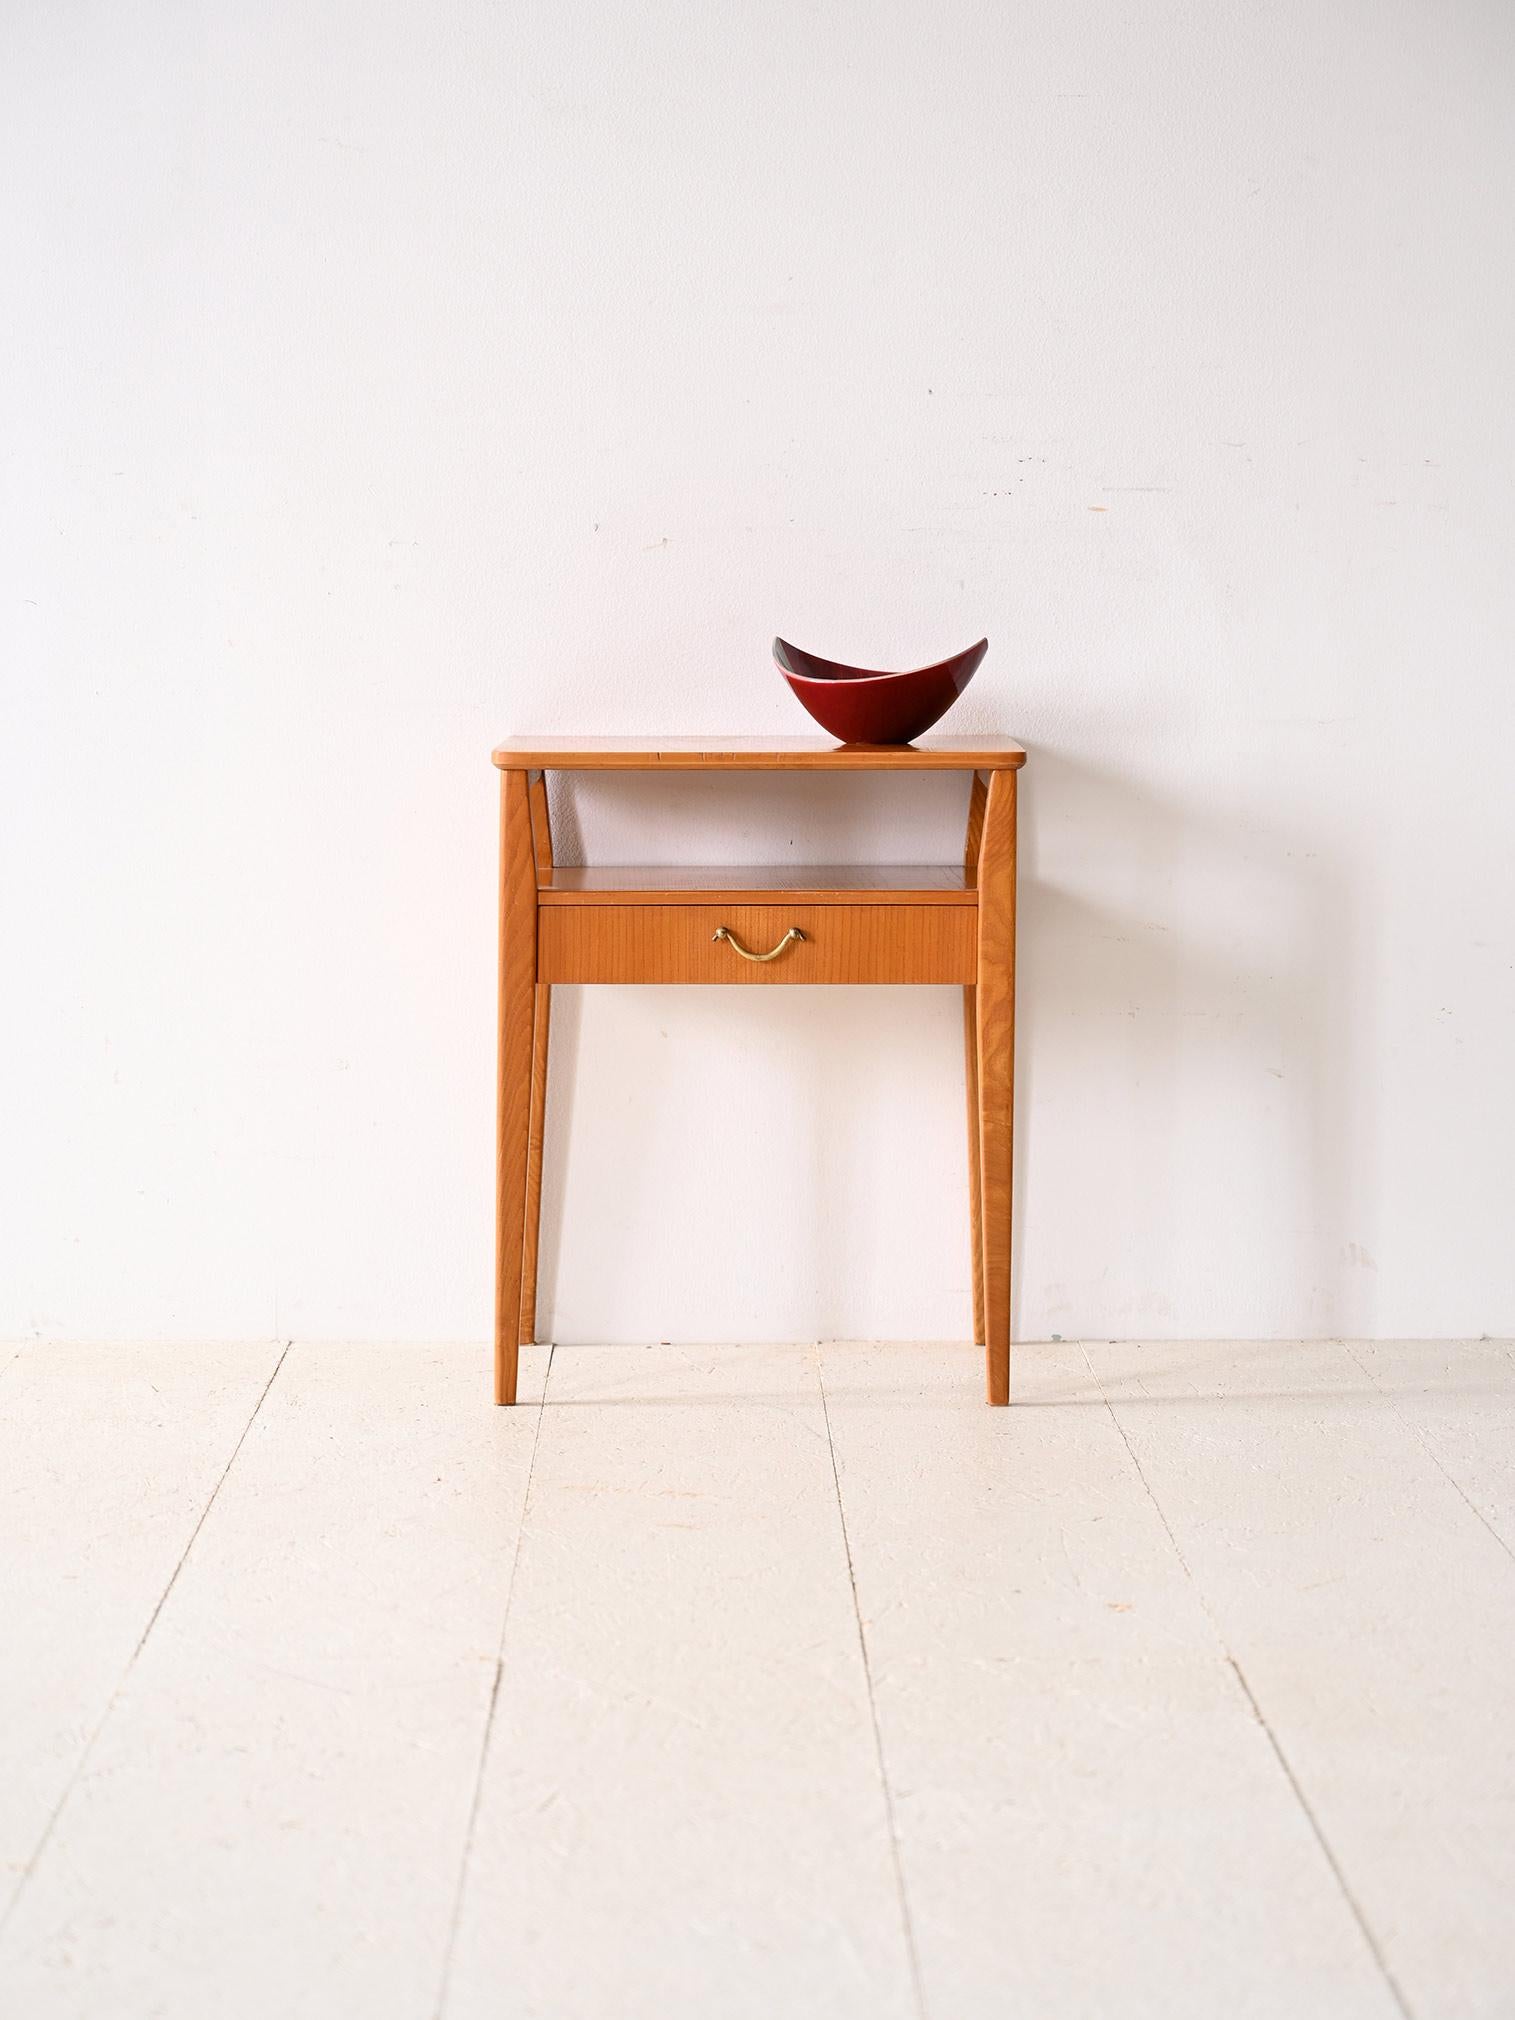 Scandinavian teak and birch bedside table.

This 1960s coffee table recalculates the style and taste of mid-century Nordic design. Consisting of a double shelf and equipped with a drawer with a gold metal handle, it is ideal as a bedside table as